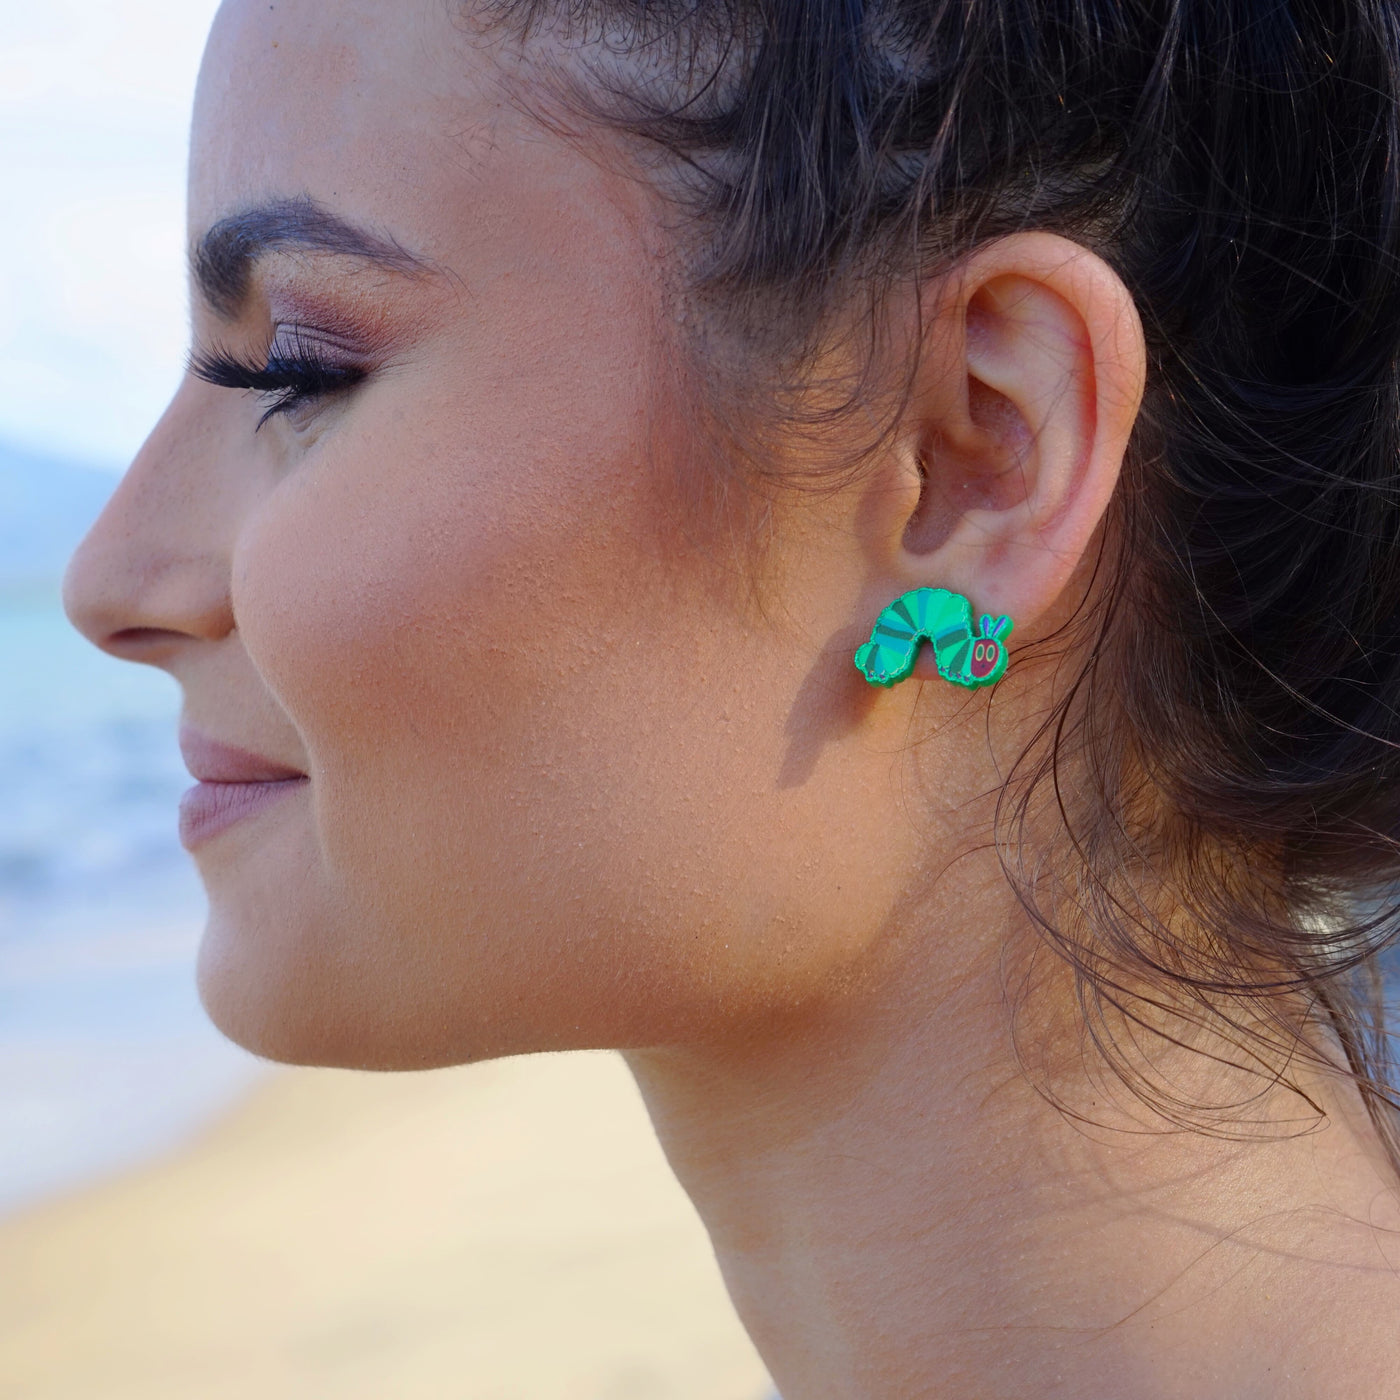 Quirky Earrings From Amazon  POPSUGAR Fashion